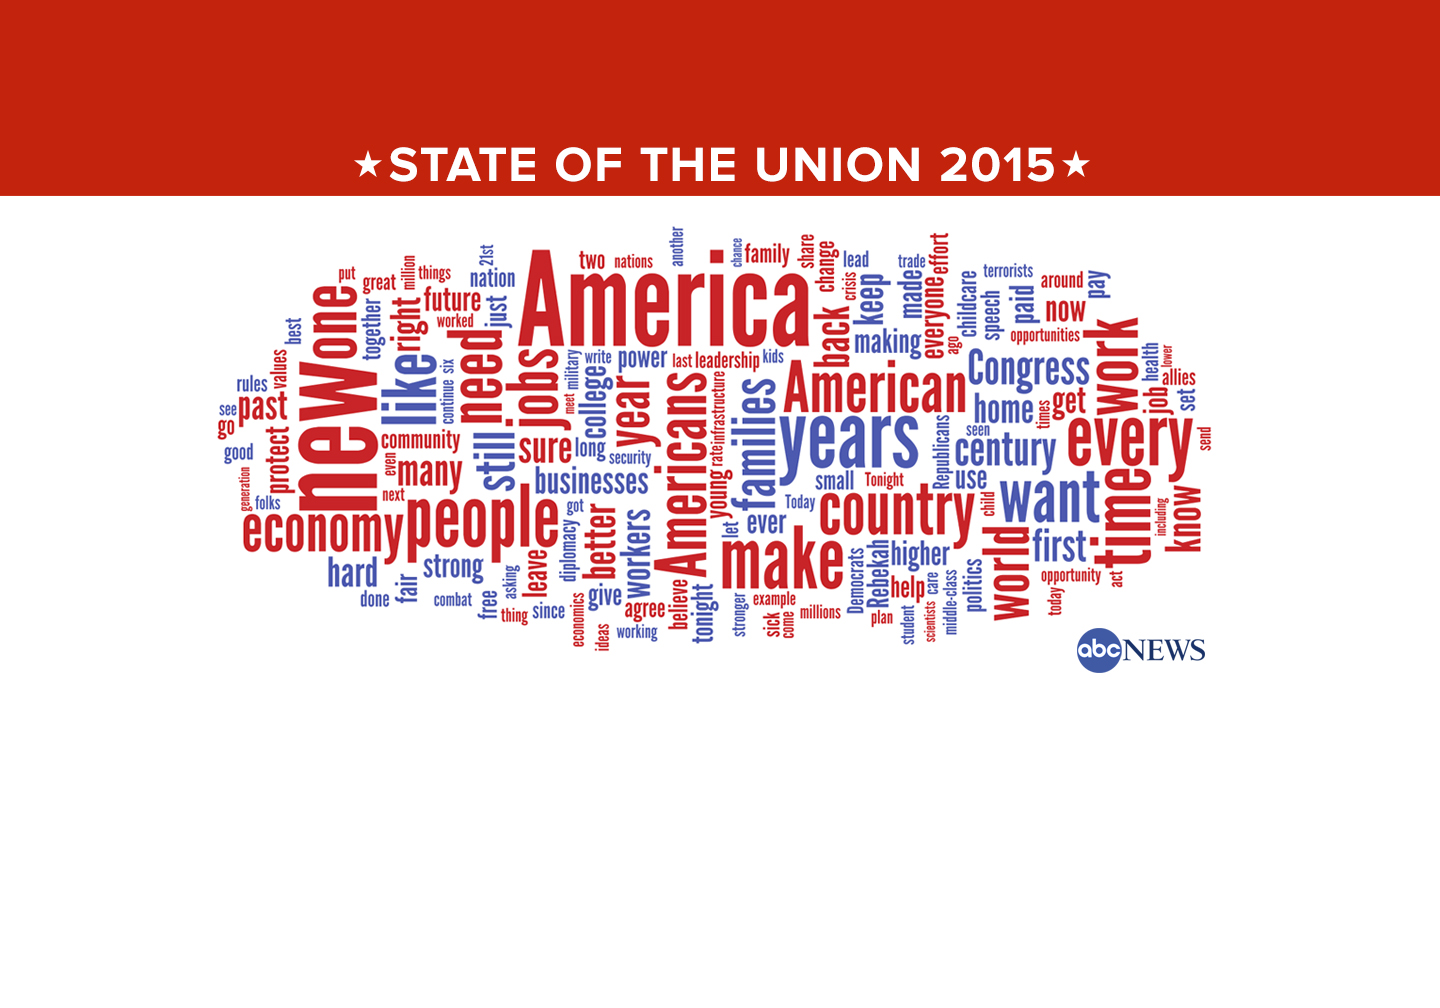 PHOTO: A word cloud depicting words used in the 2015 State of the Union speech by President Obama. 